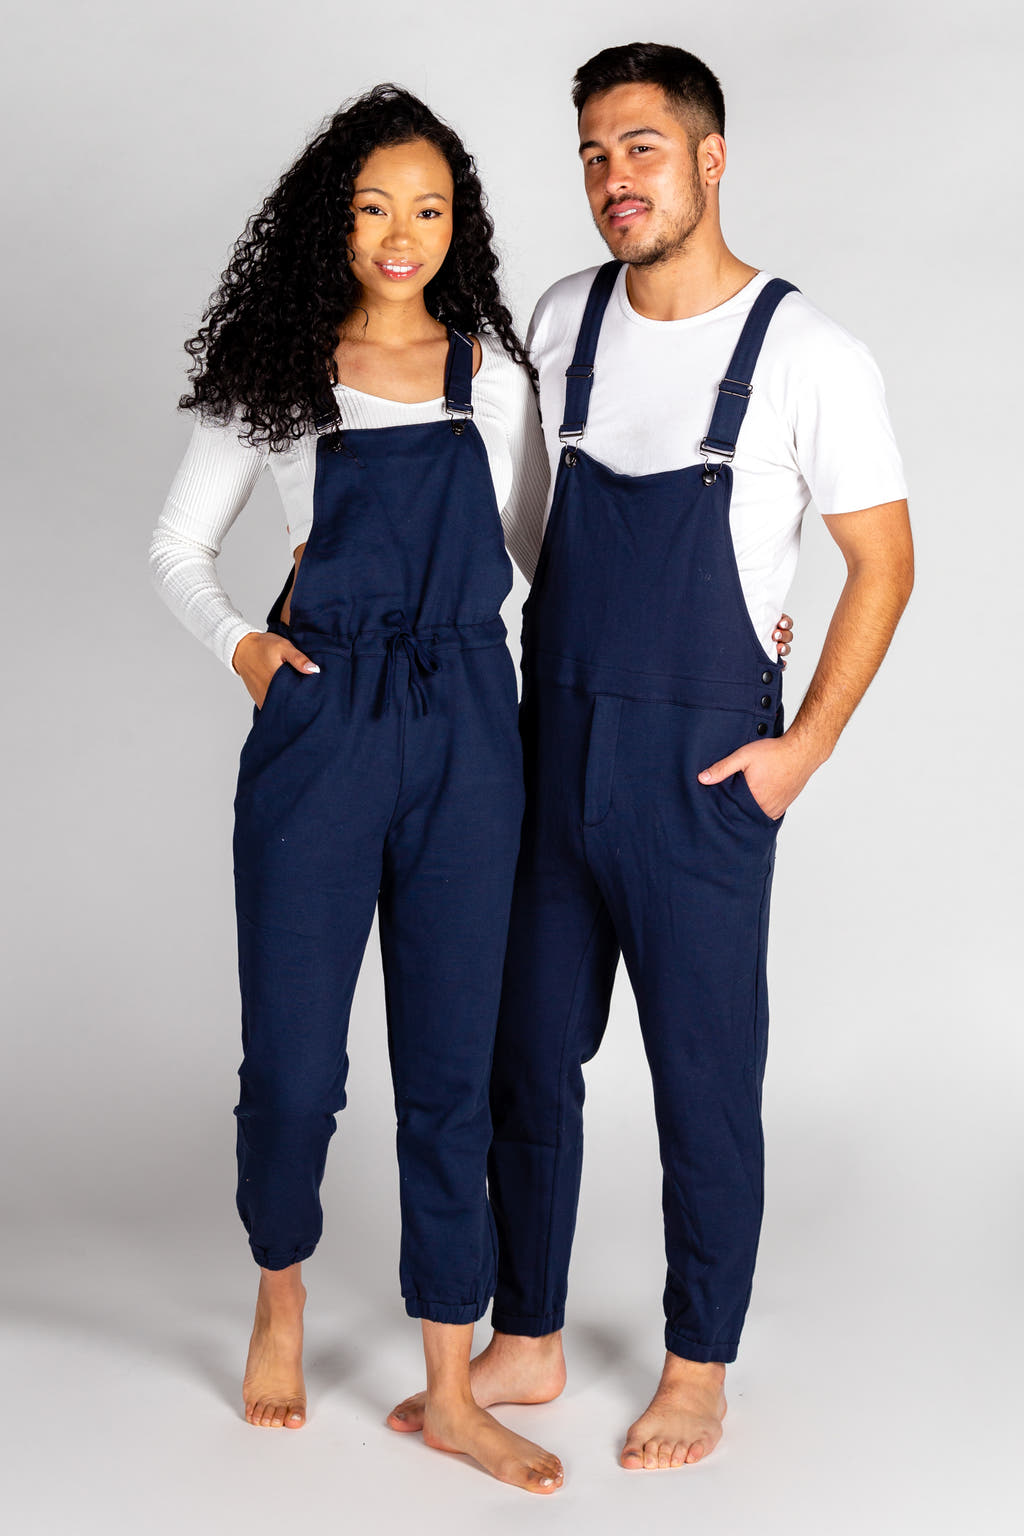 The fuzzy naval womens pajama overalls